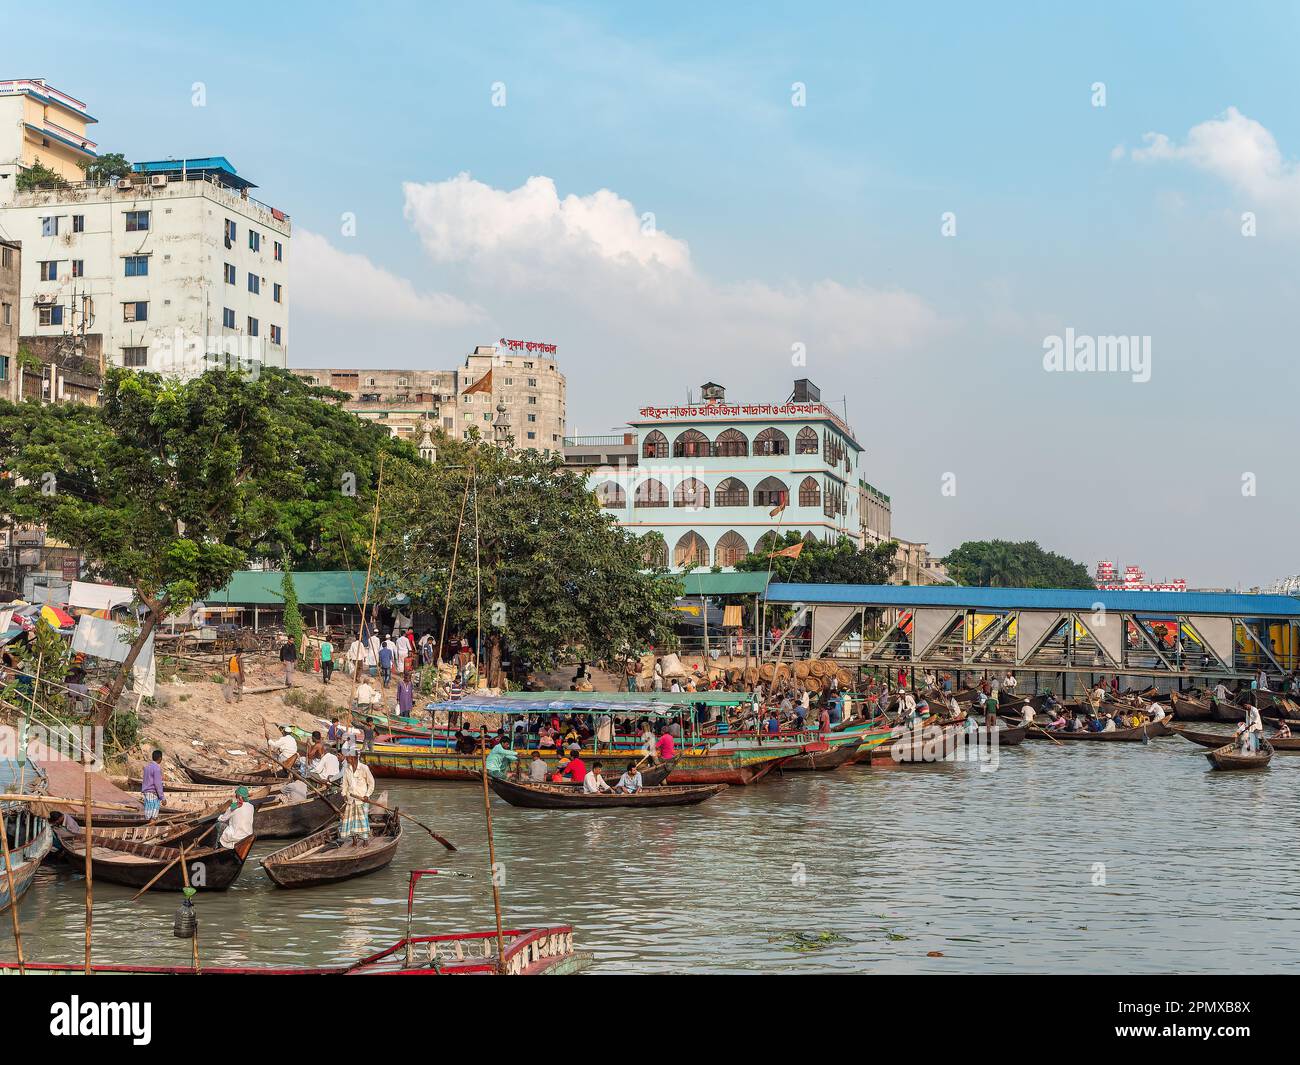 Local ferries at Wise Ghat Boat Station on Buriganga River in Dhaka, the capital of Bangladesh. Stock Photo